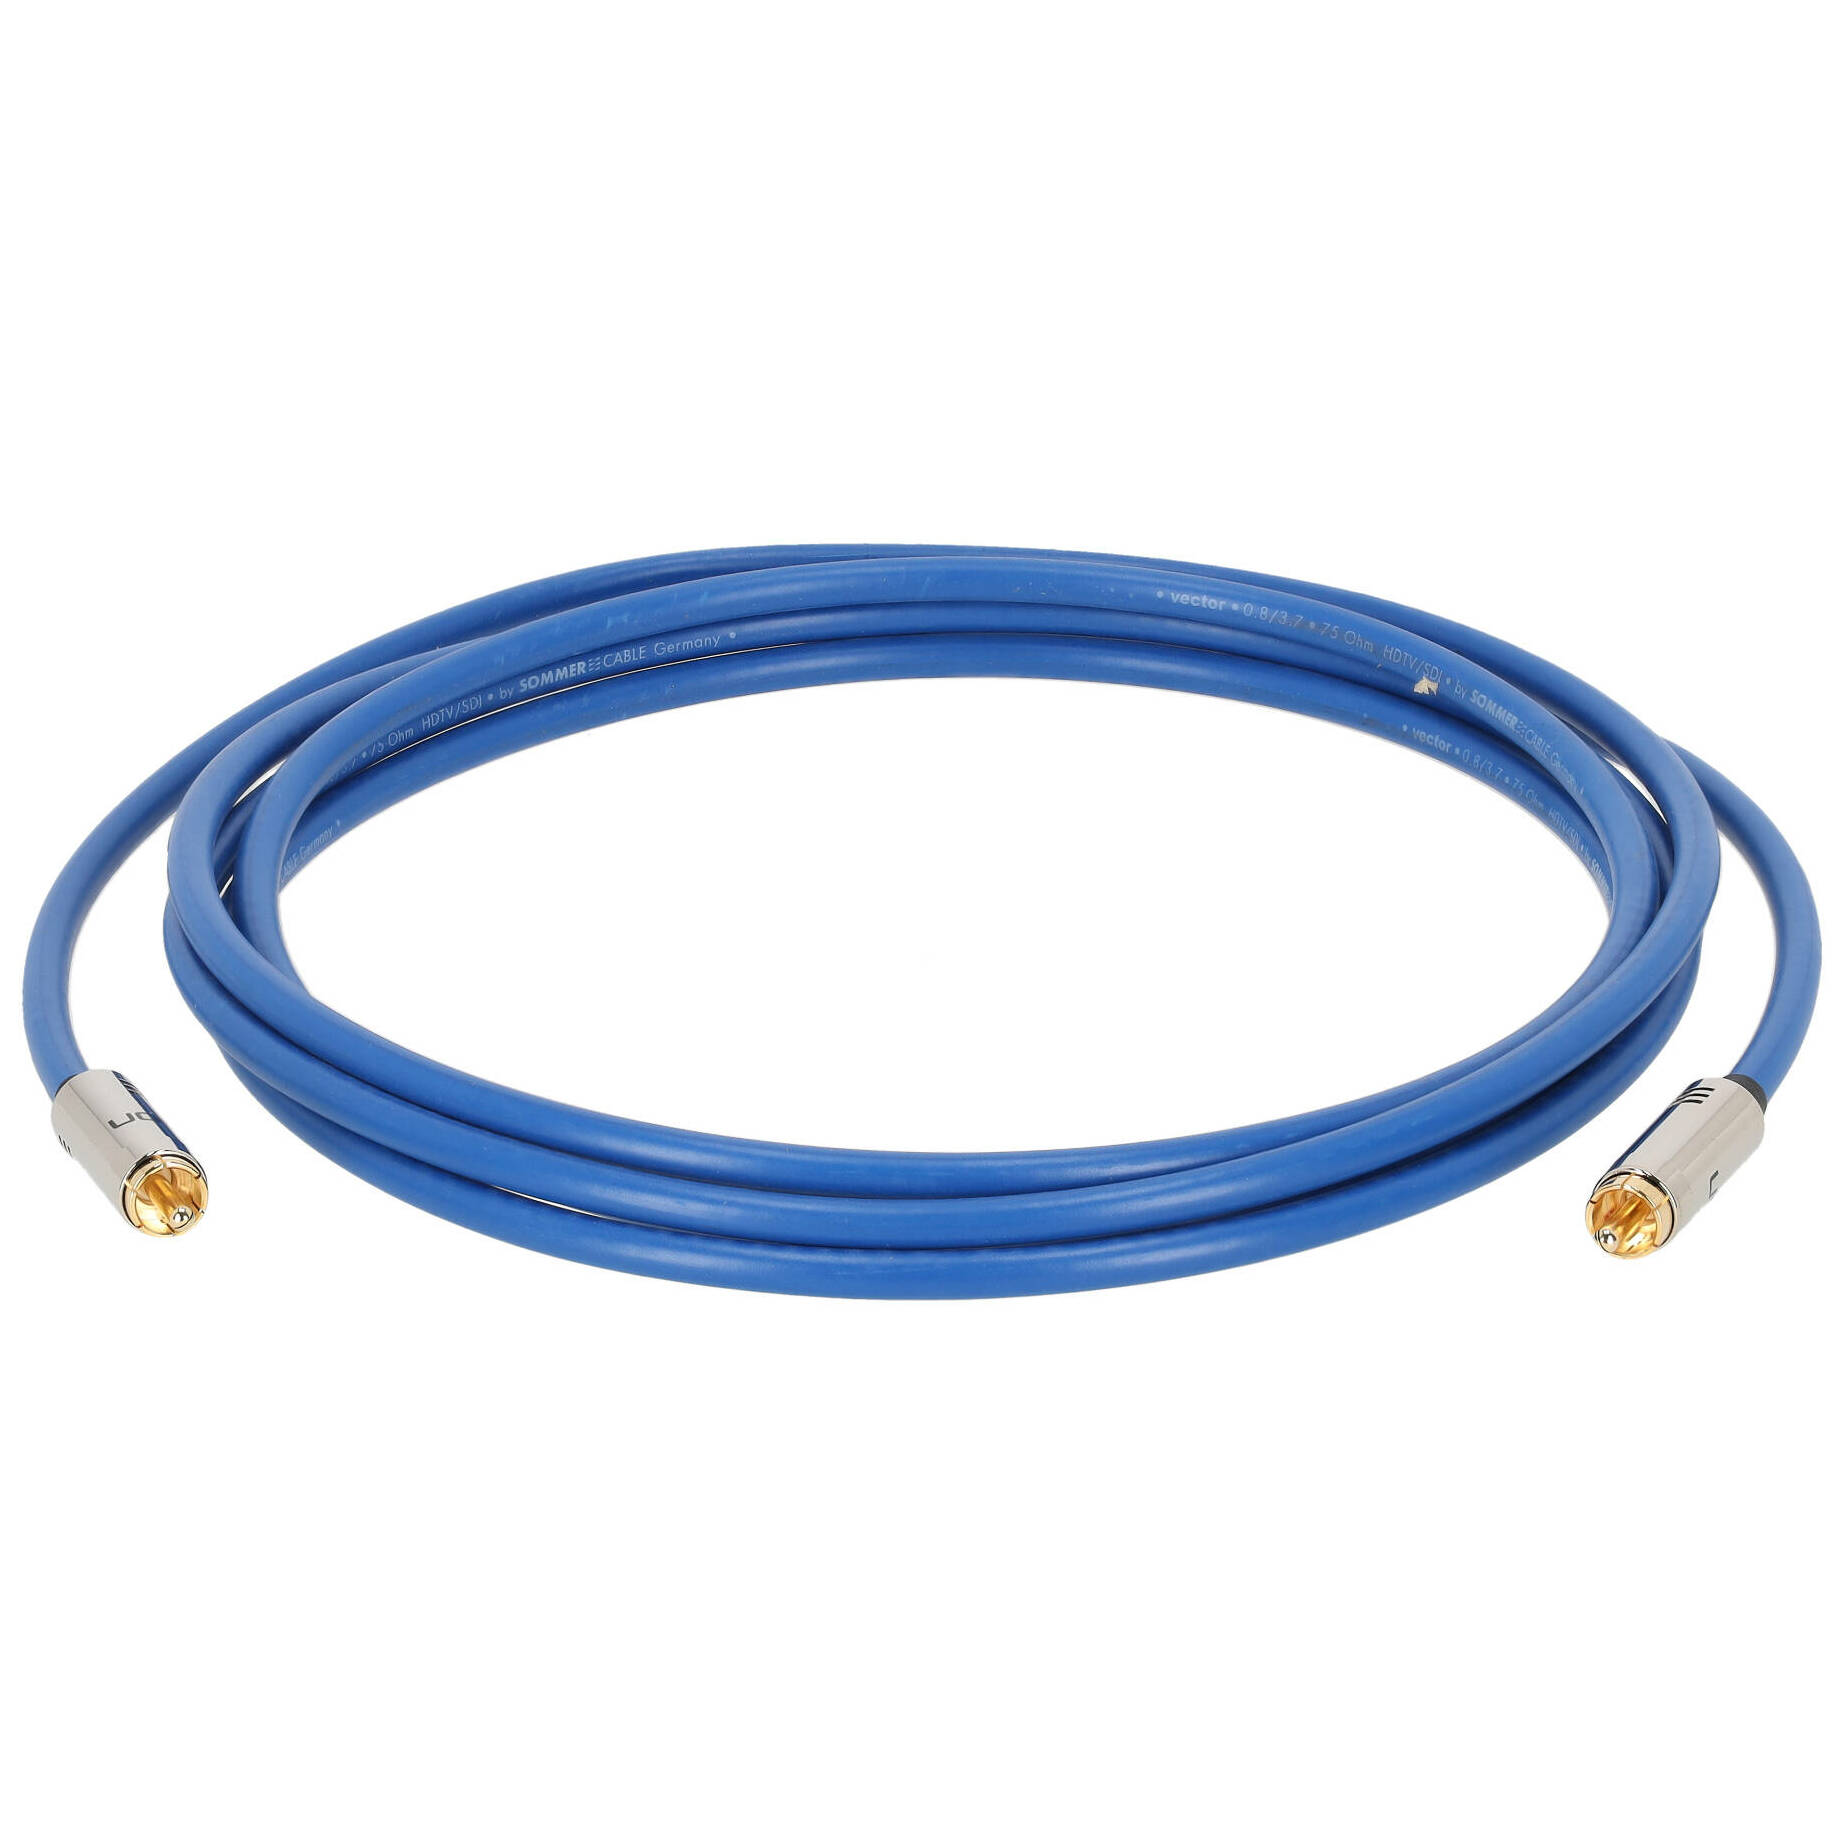 Sommer Cable VT2I-0300 SC-VECTOR 0.8/3.7 S/PDIF 75 Ohm Cinch male - Cinch male 3 Meter - Blau 1